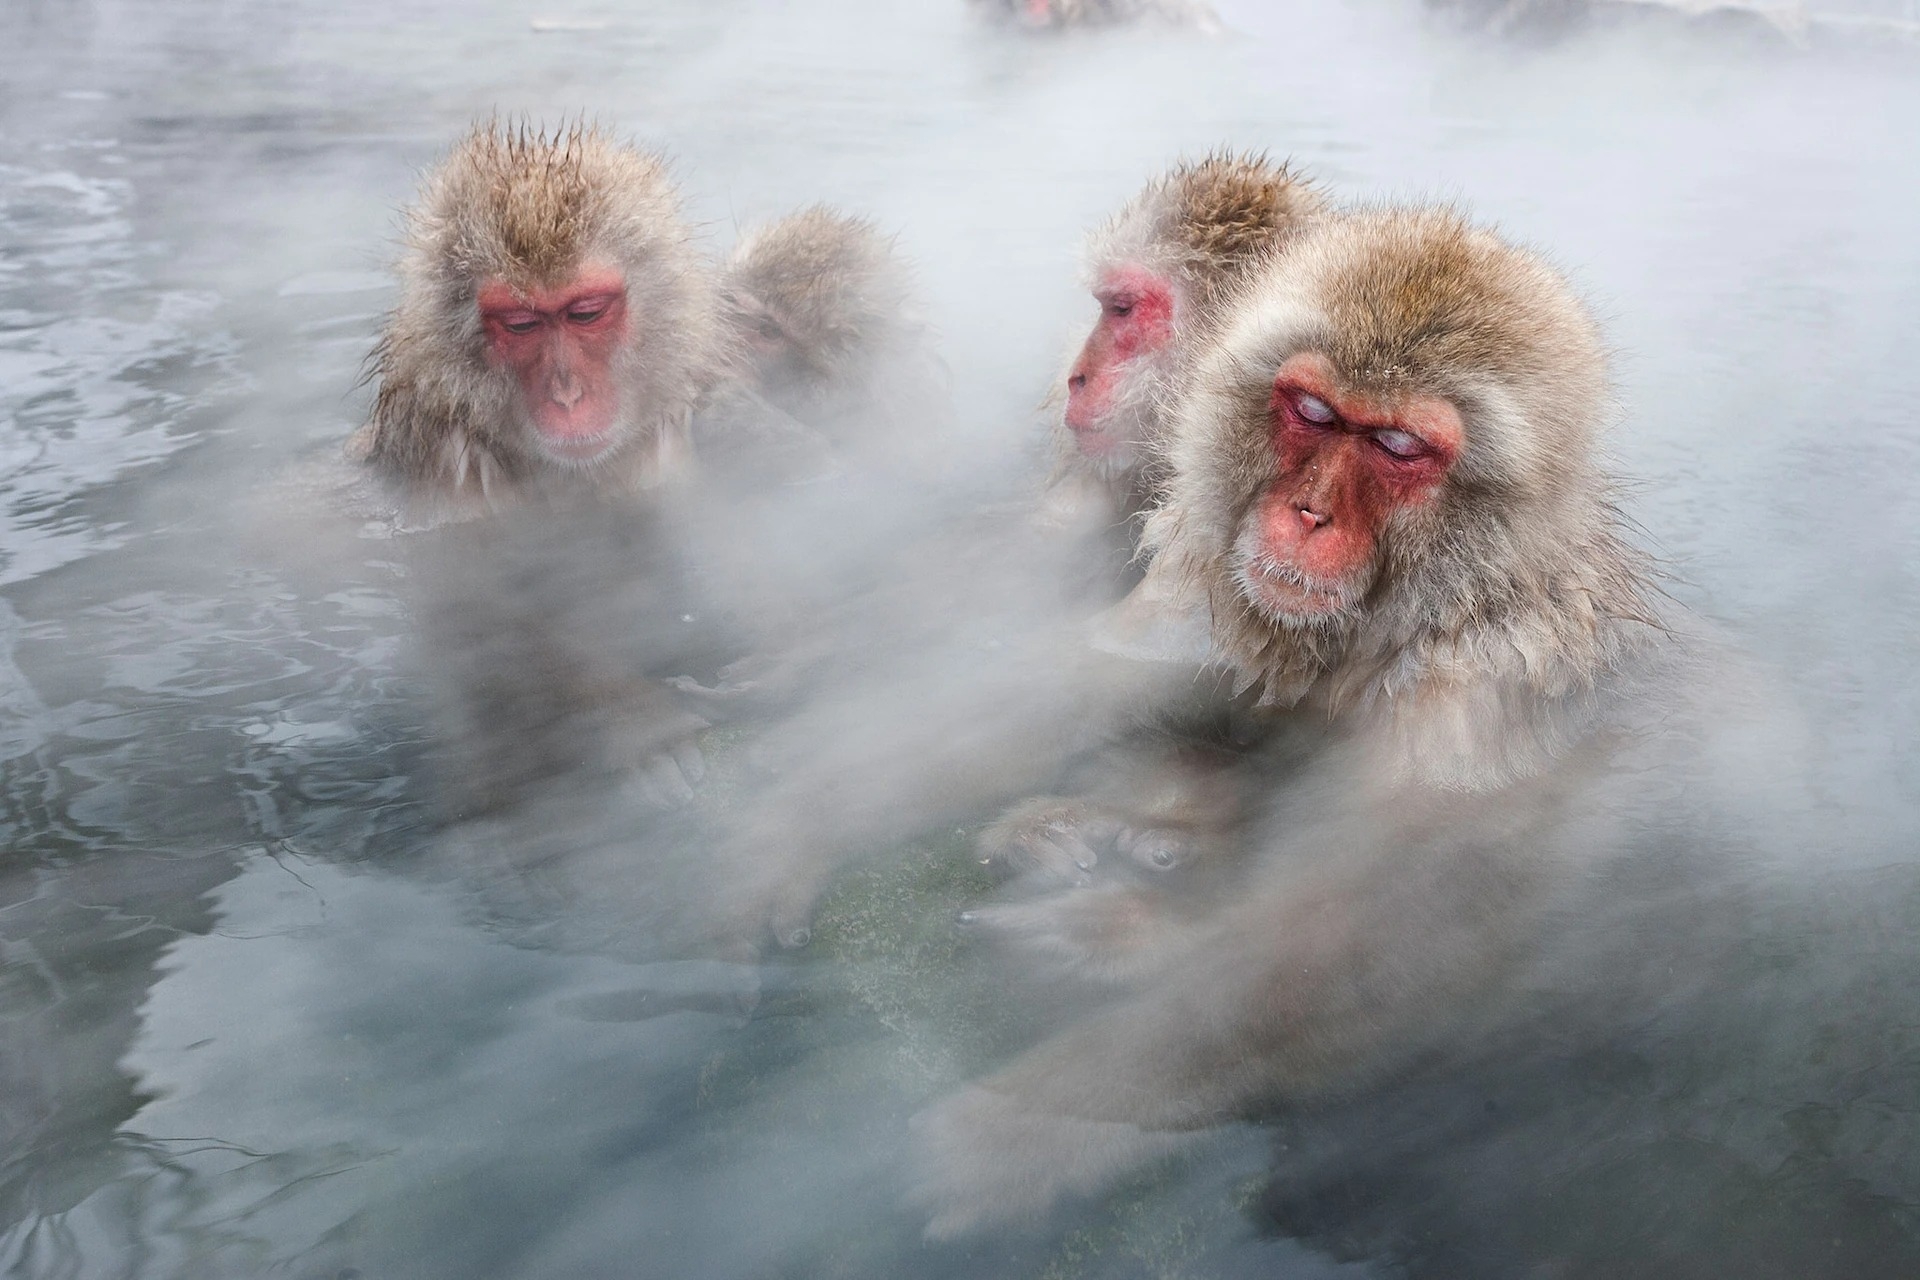 Photograph by Jasper Doest, Nat Geo Image Collection